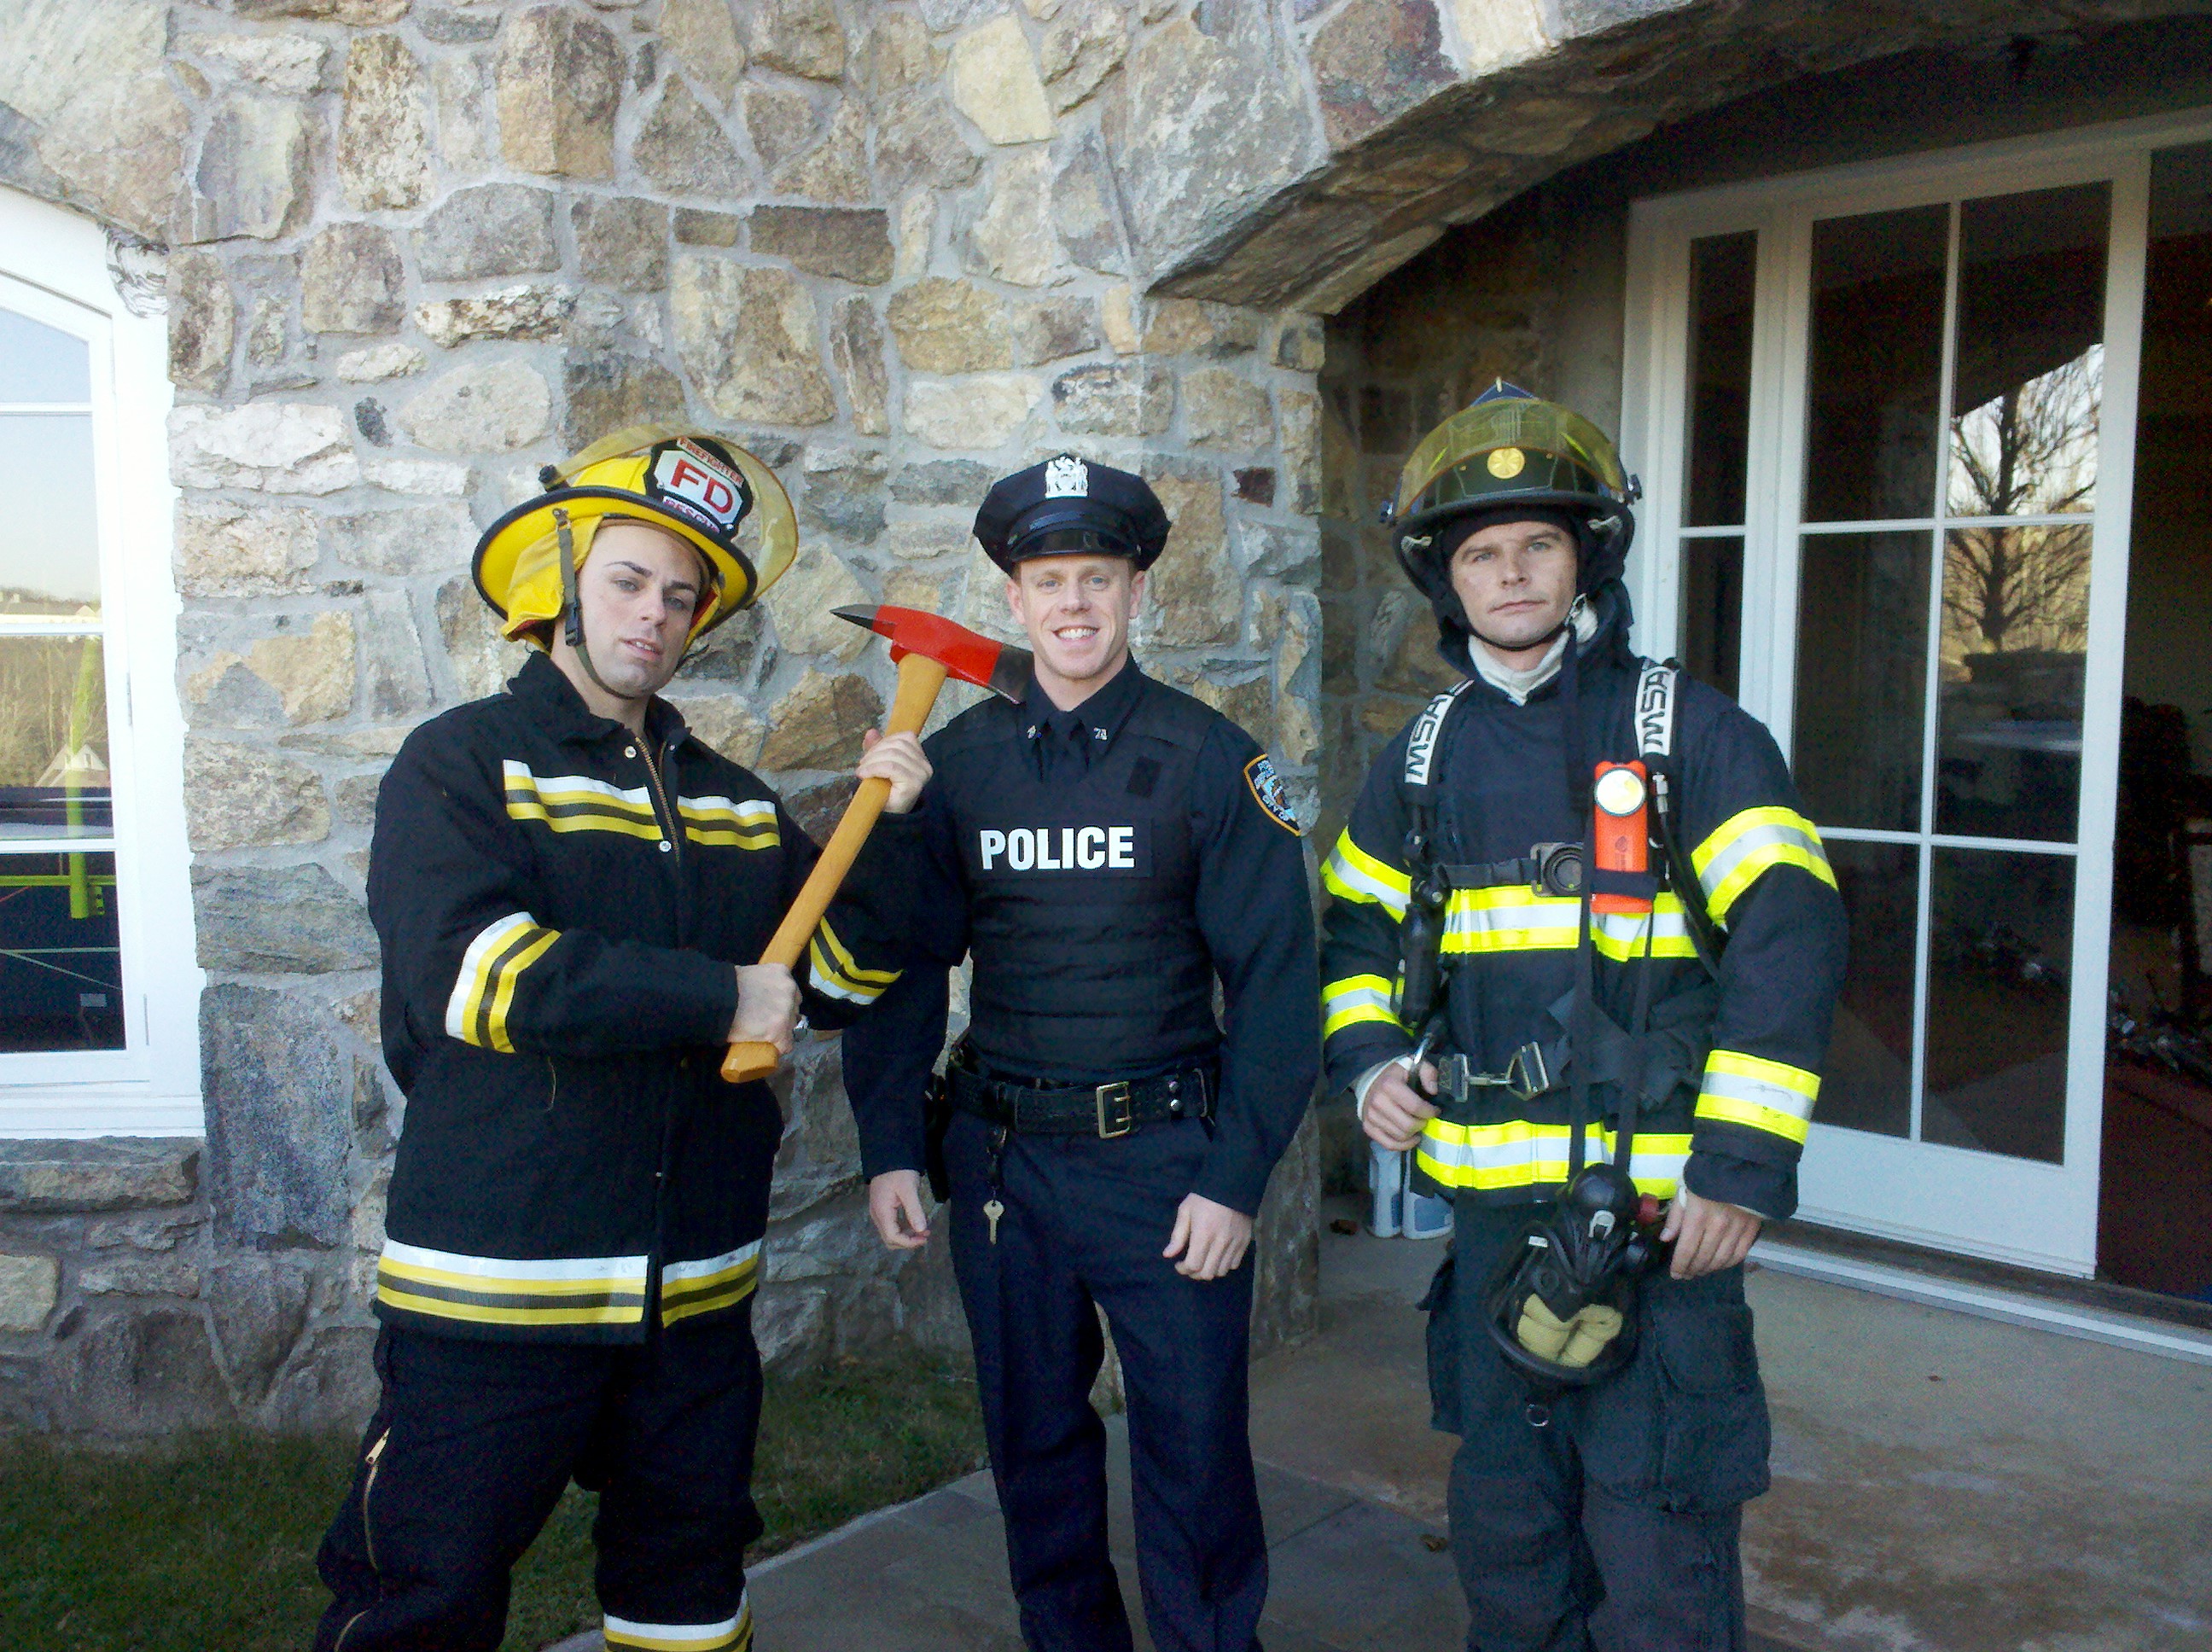 Jerry Lobrow and Chris Haemmerle as NYC Fireman in a National Super Blox Commercial